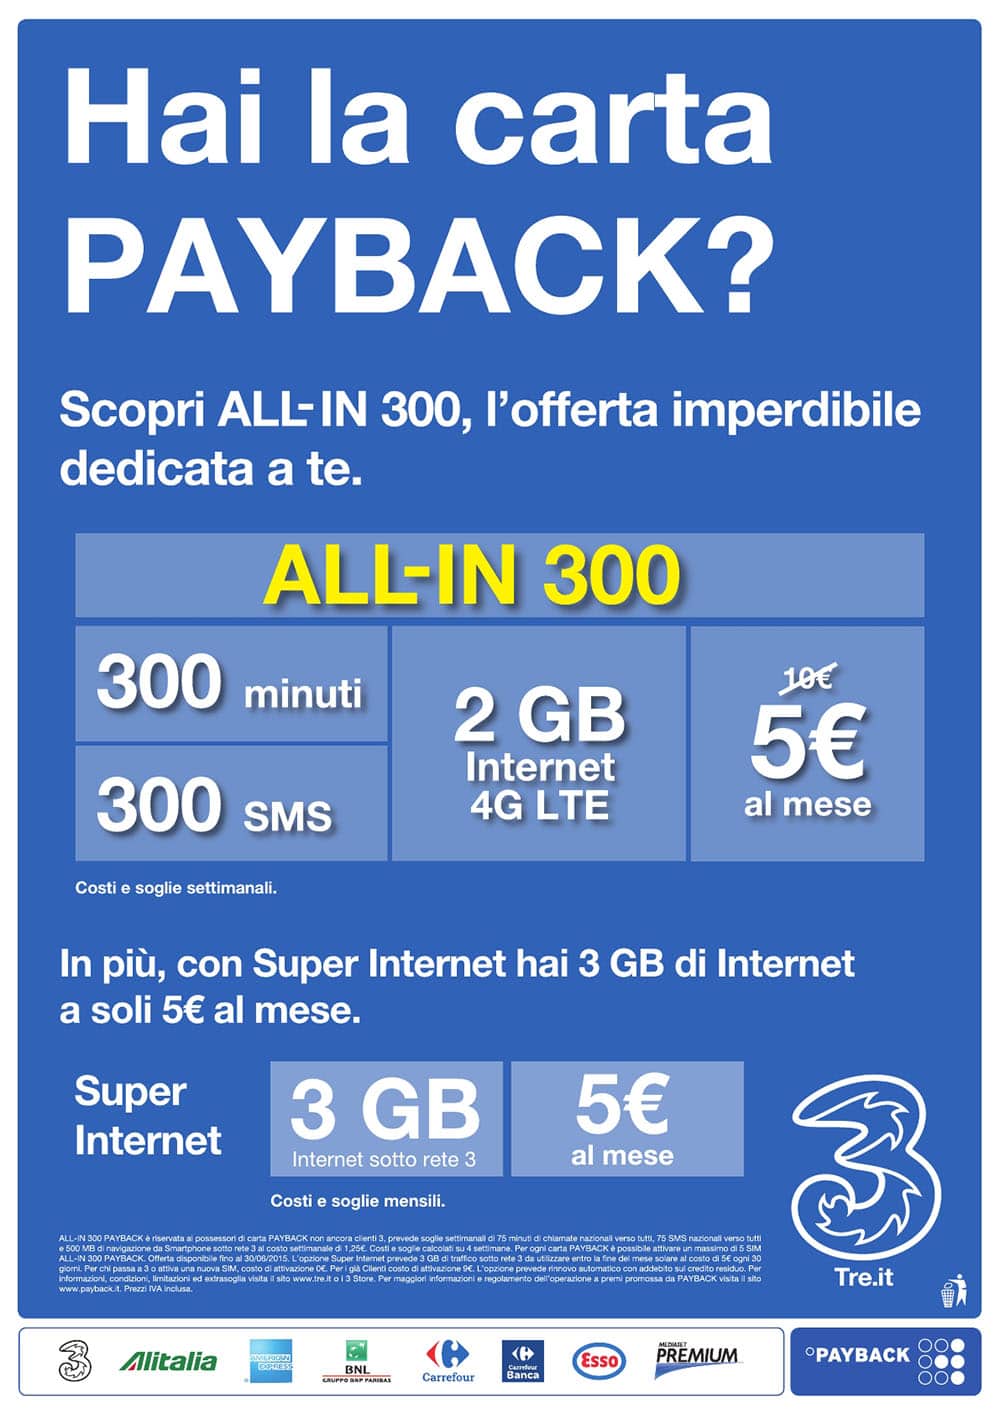 all-in 300 payback